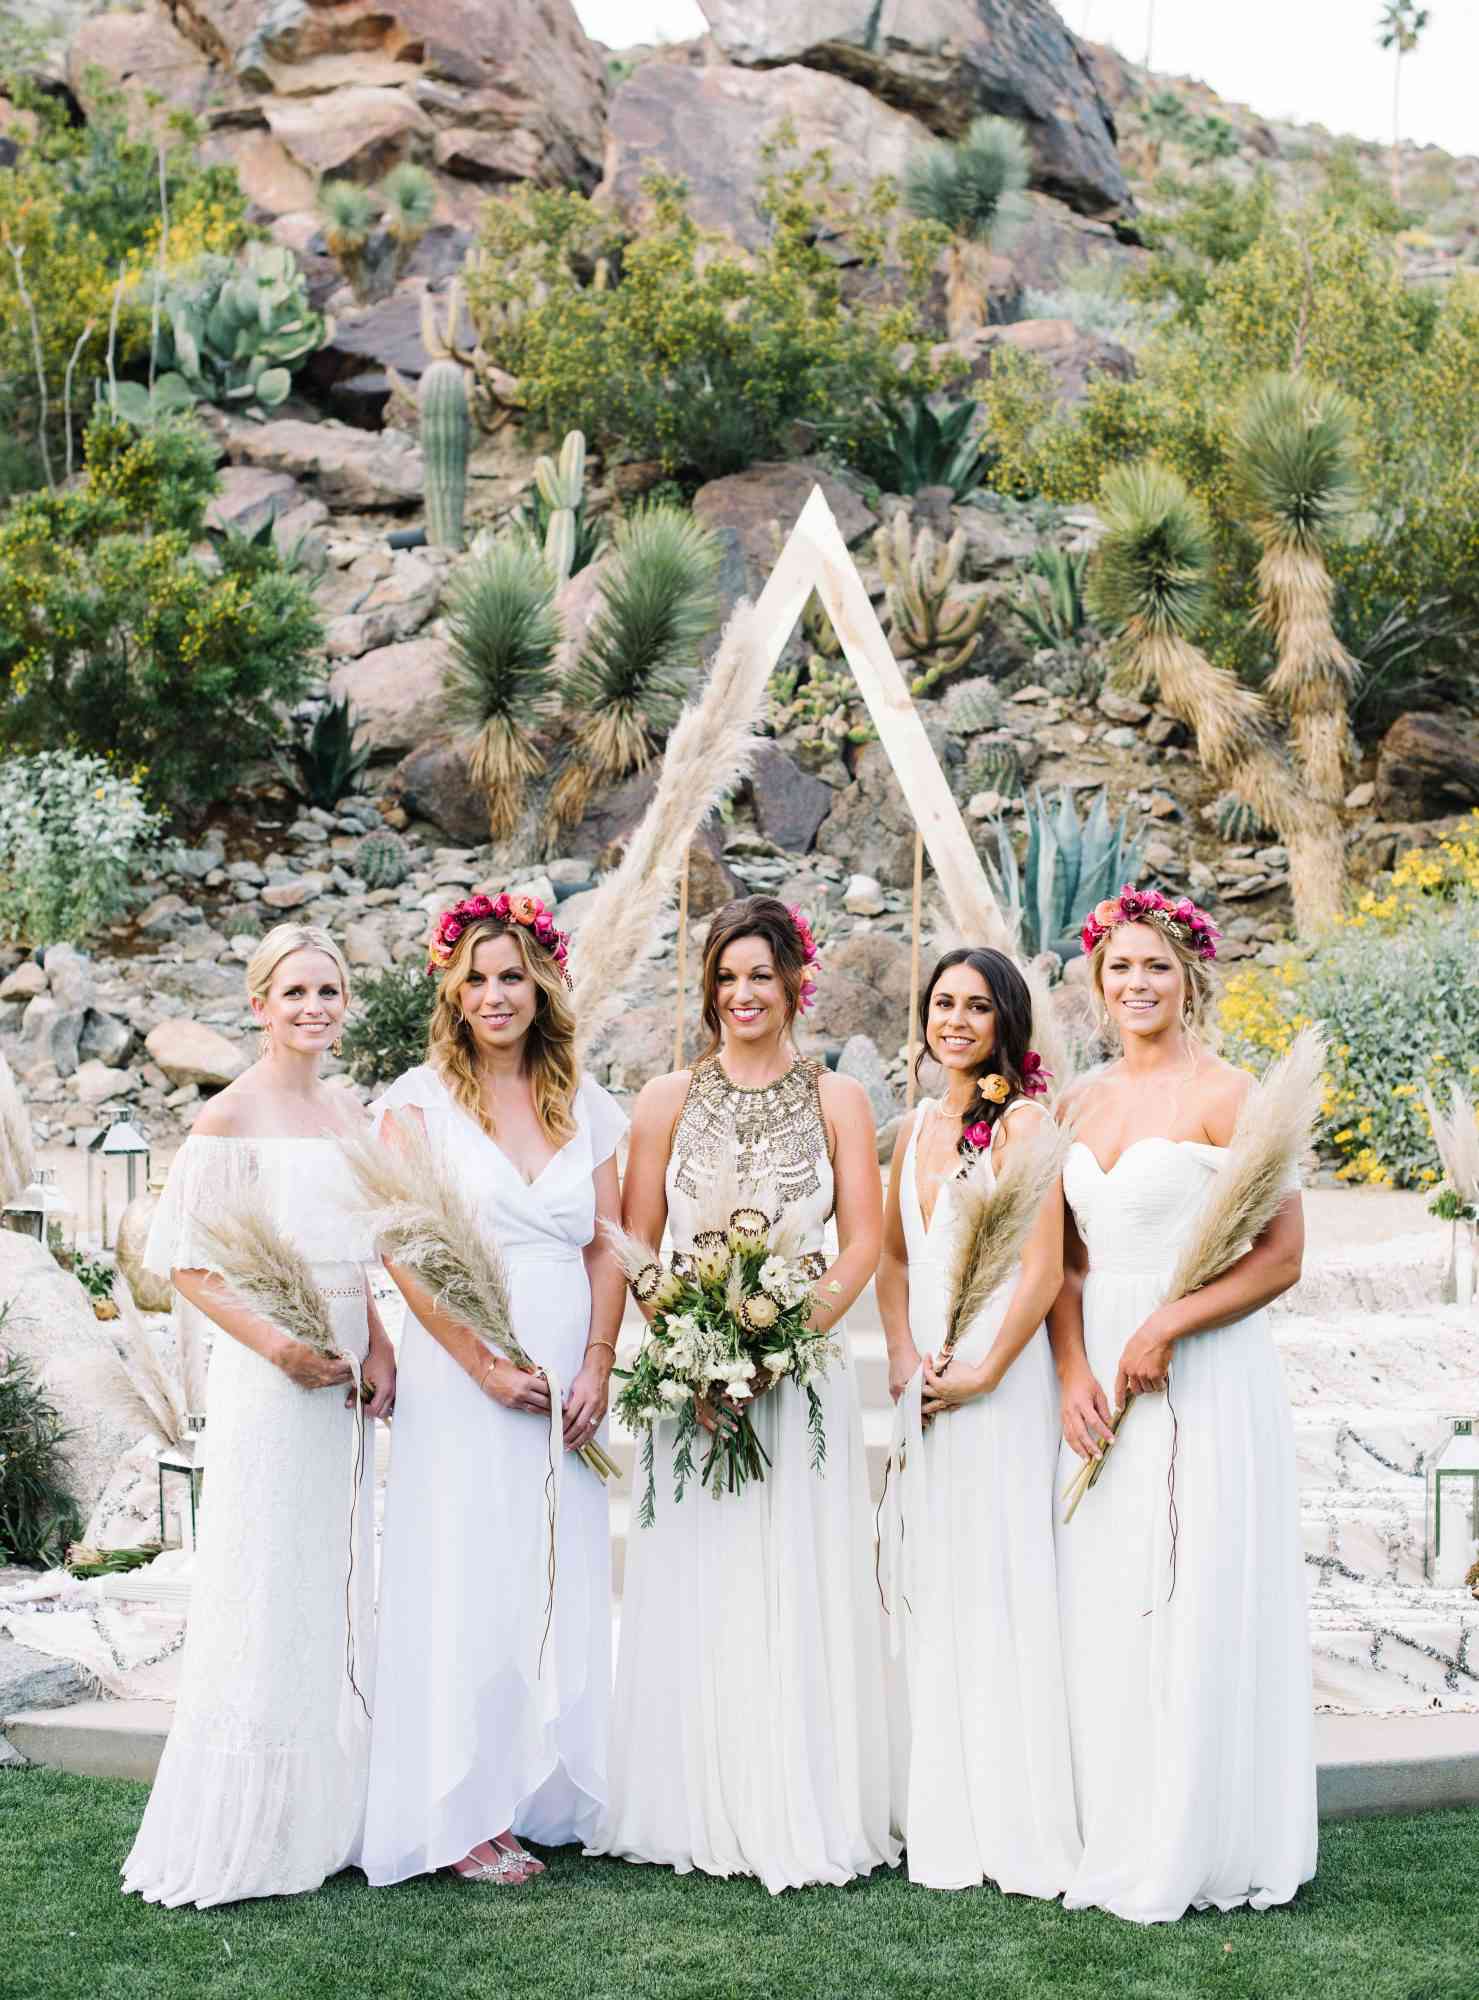 White Bridesmaids' Dresses with Colorful Accessories